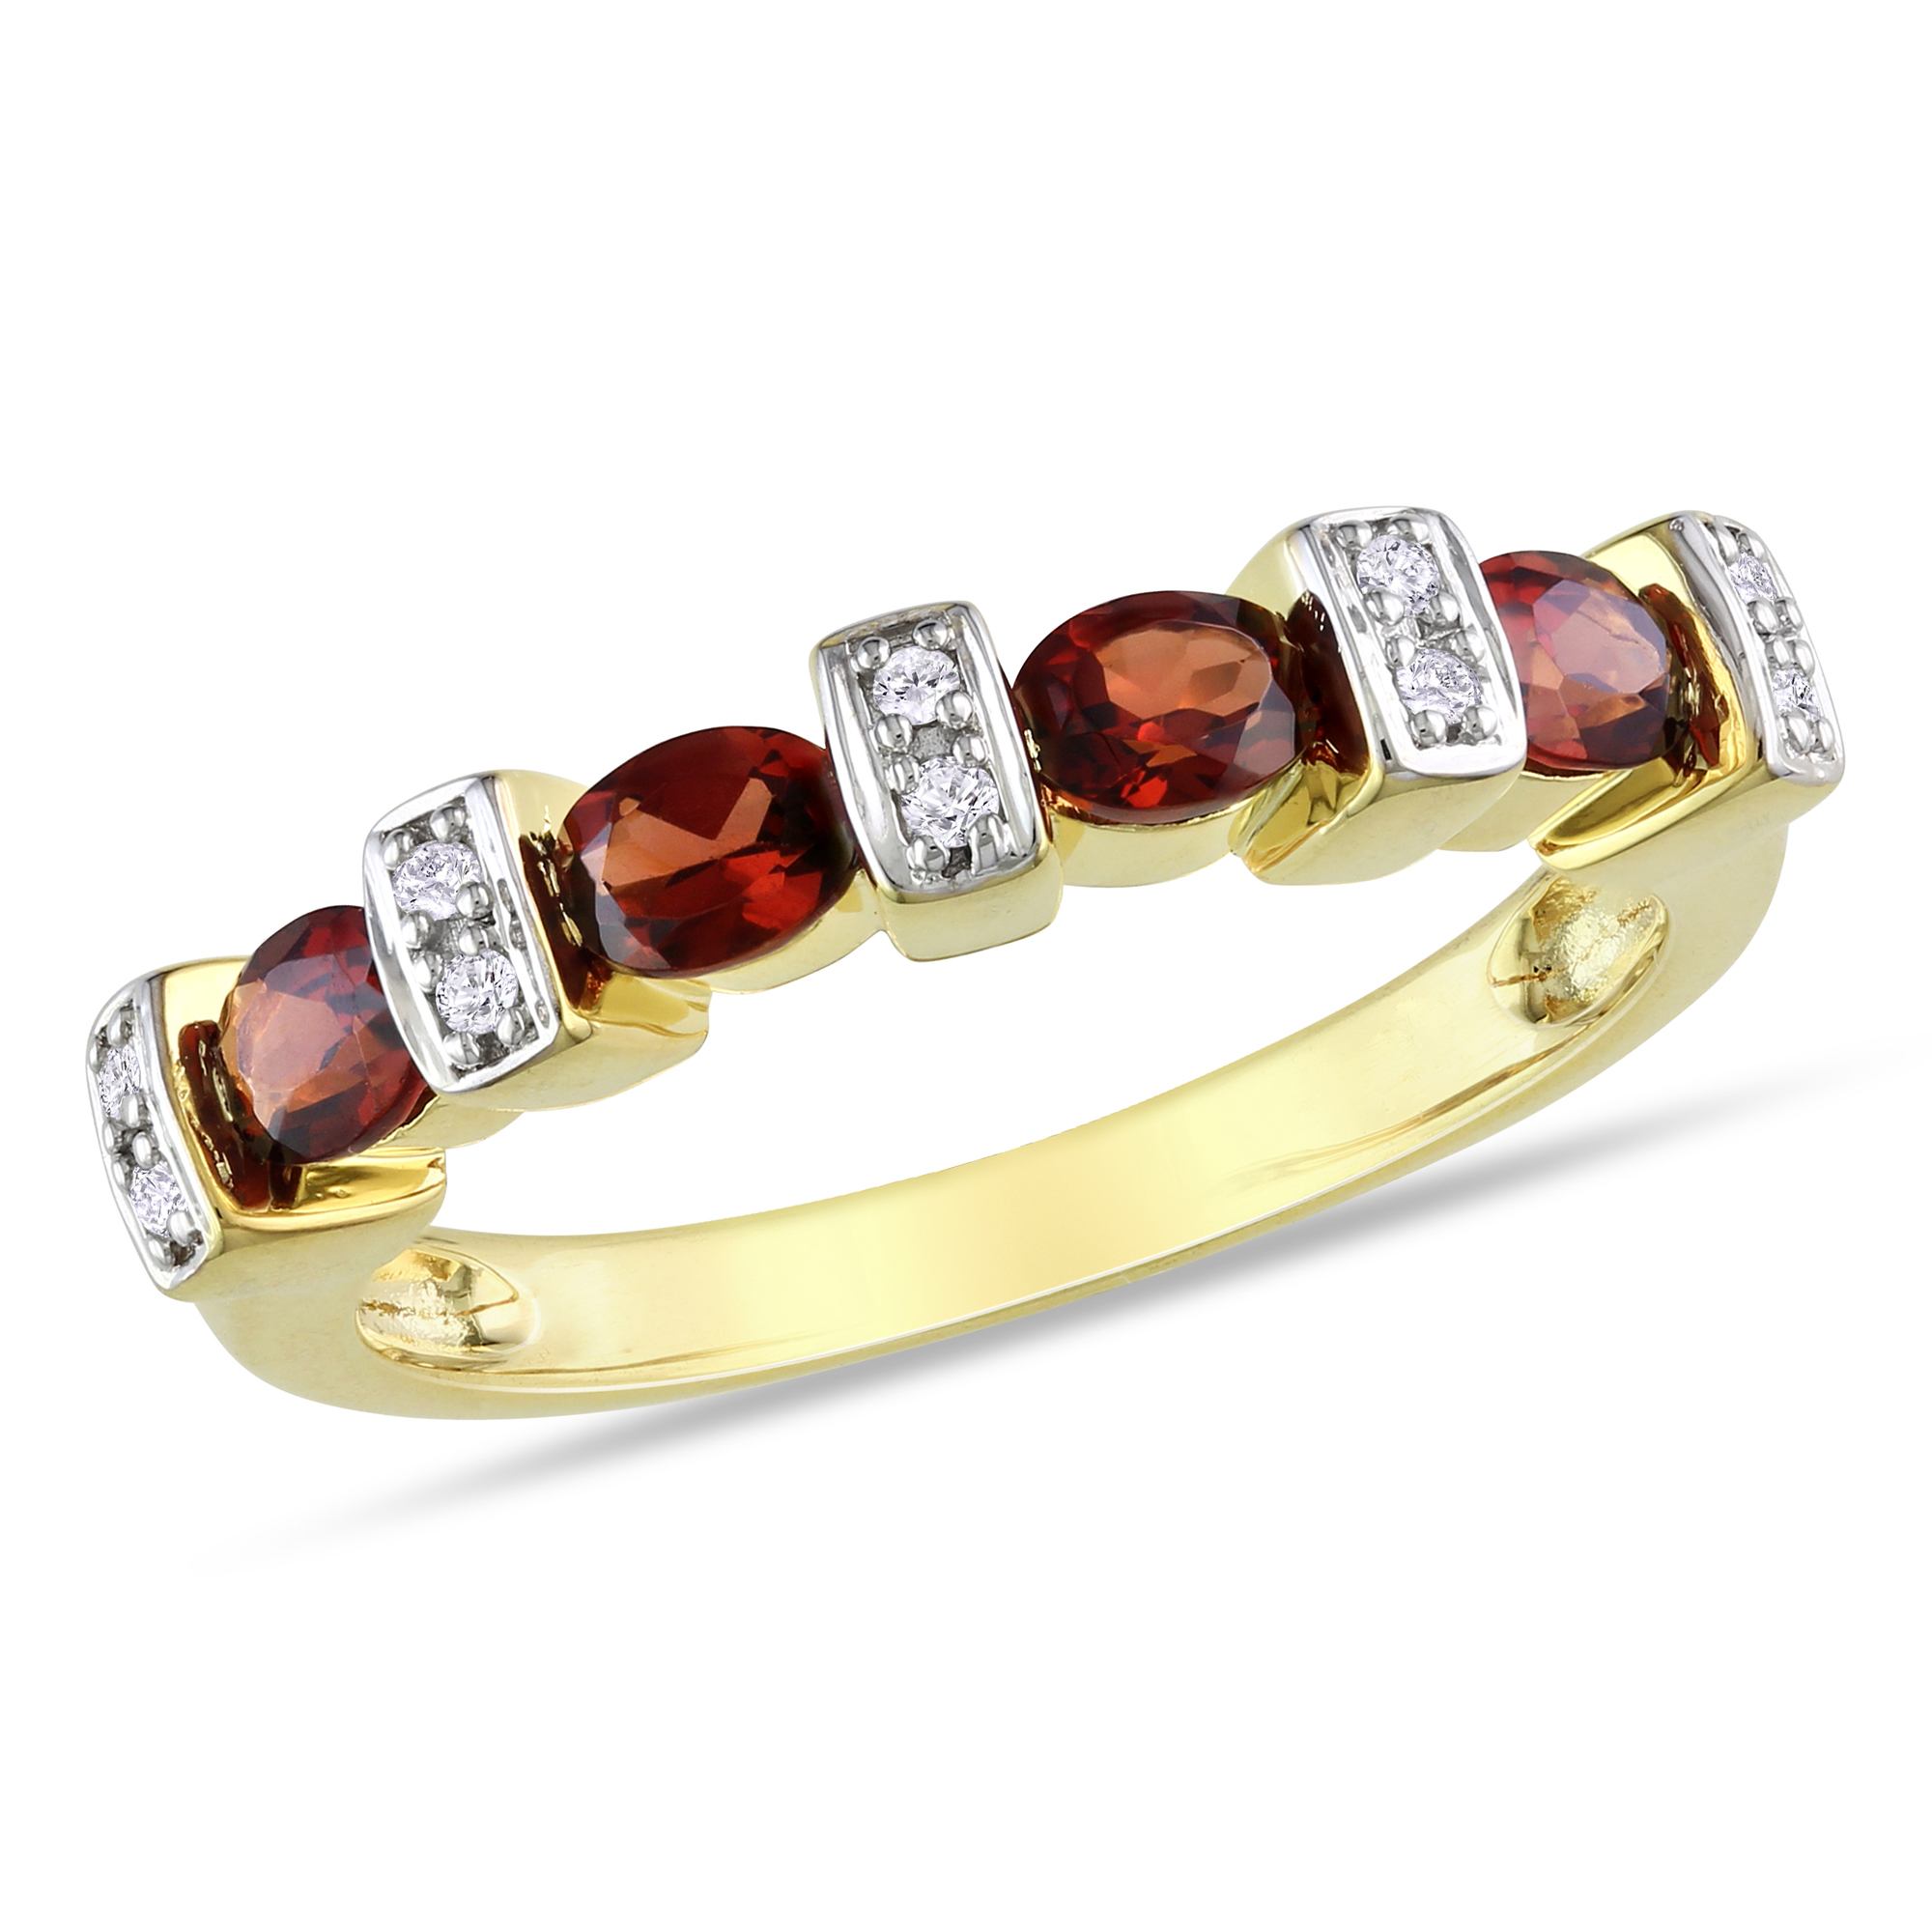 Amour 0.05 Carat T.W. Diamond and 1 Carat T.G.W. Garnet Fashion Ring in Gold Plated Sterling Silver GH I3